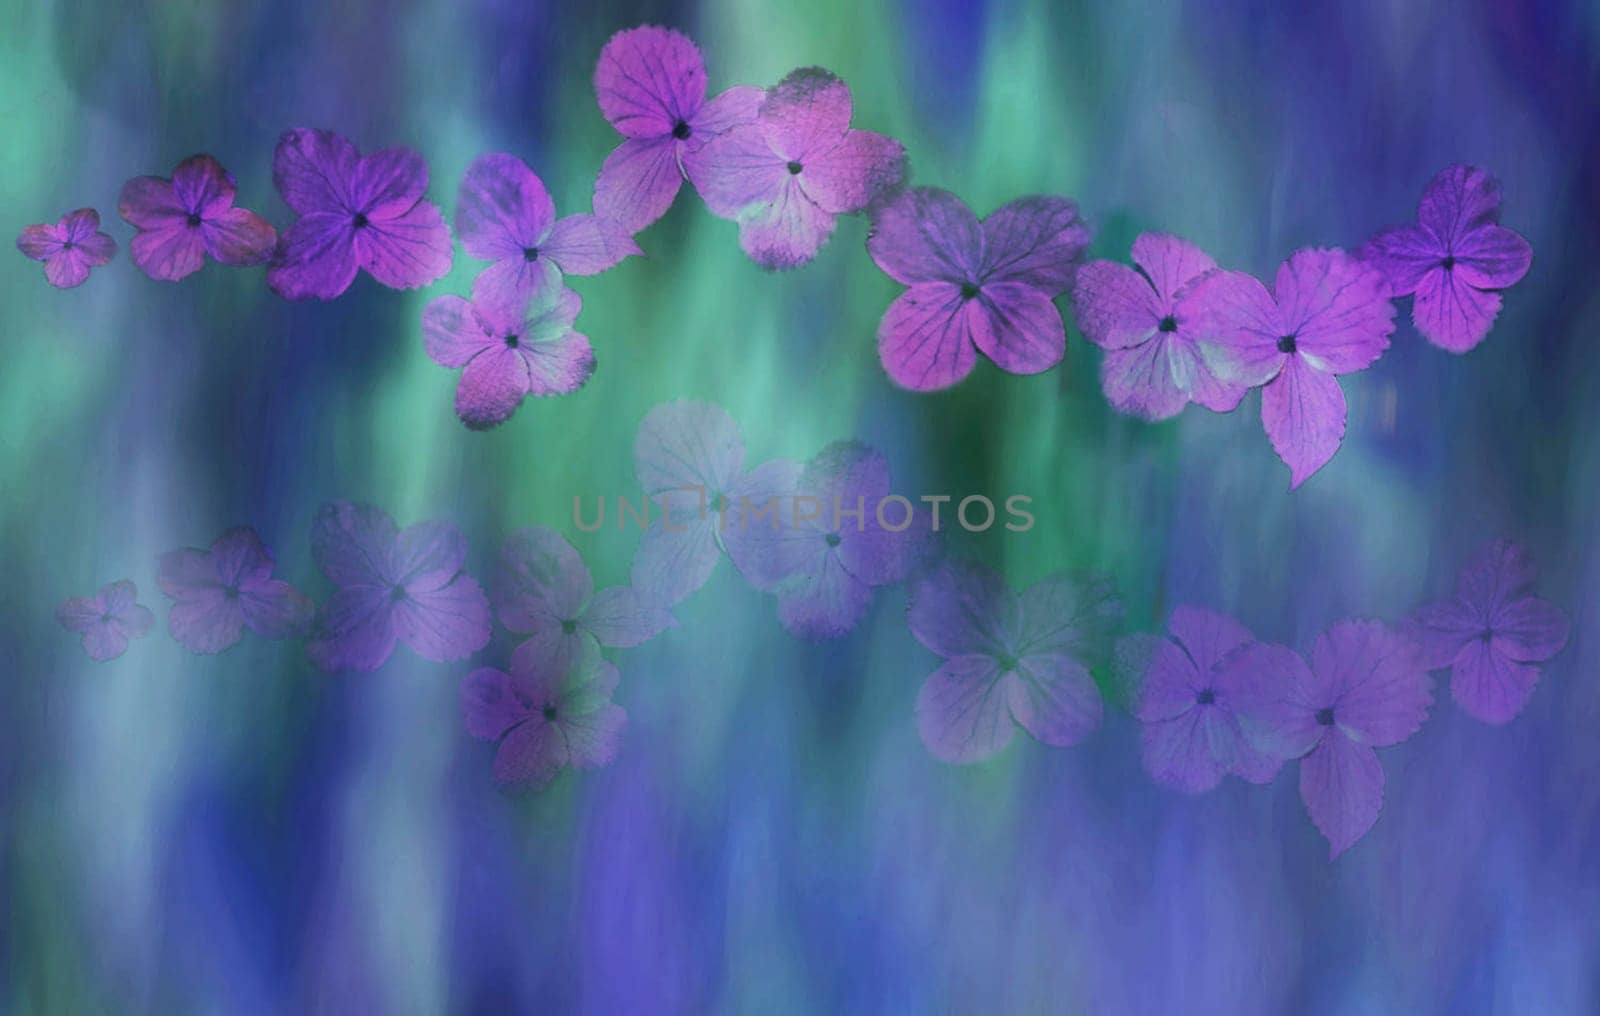 Background  perfect for wrappers, wallpapers, postcards, greeting cards, wedding invitations, romantic events.